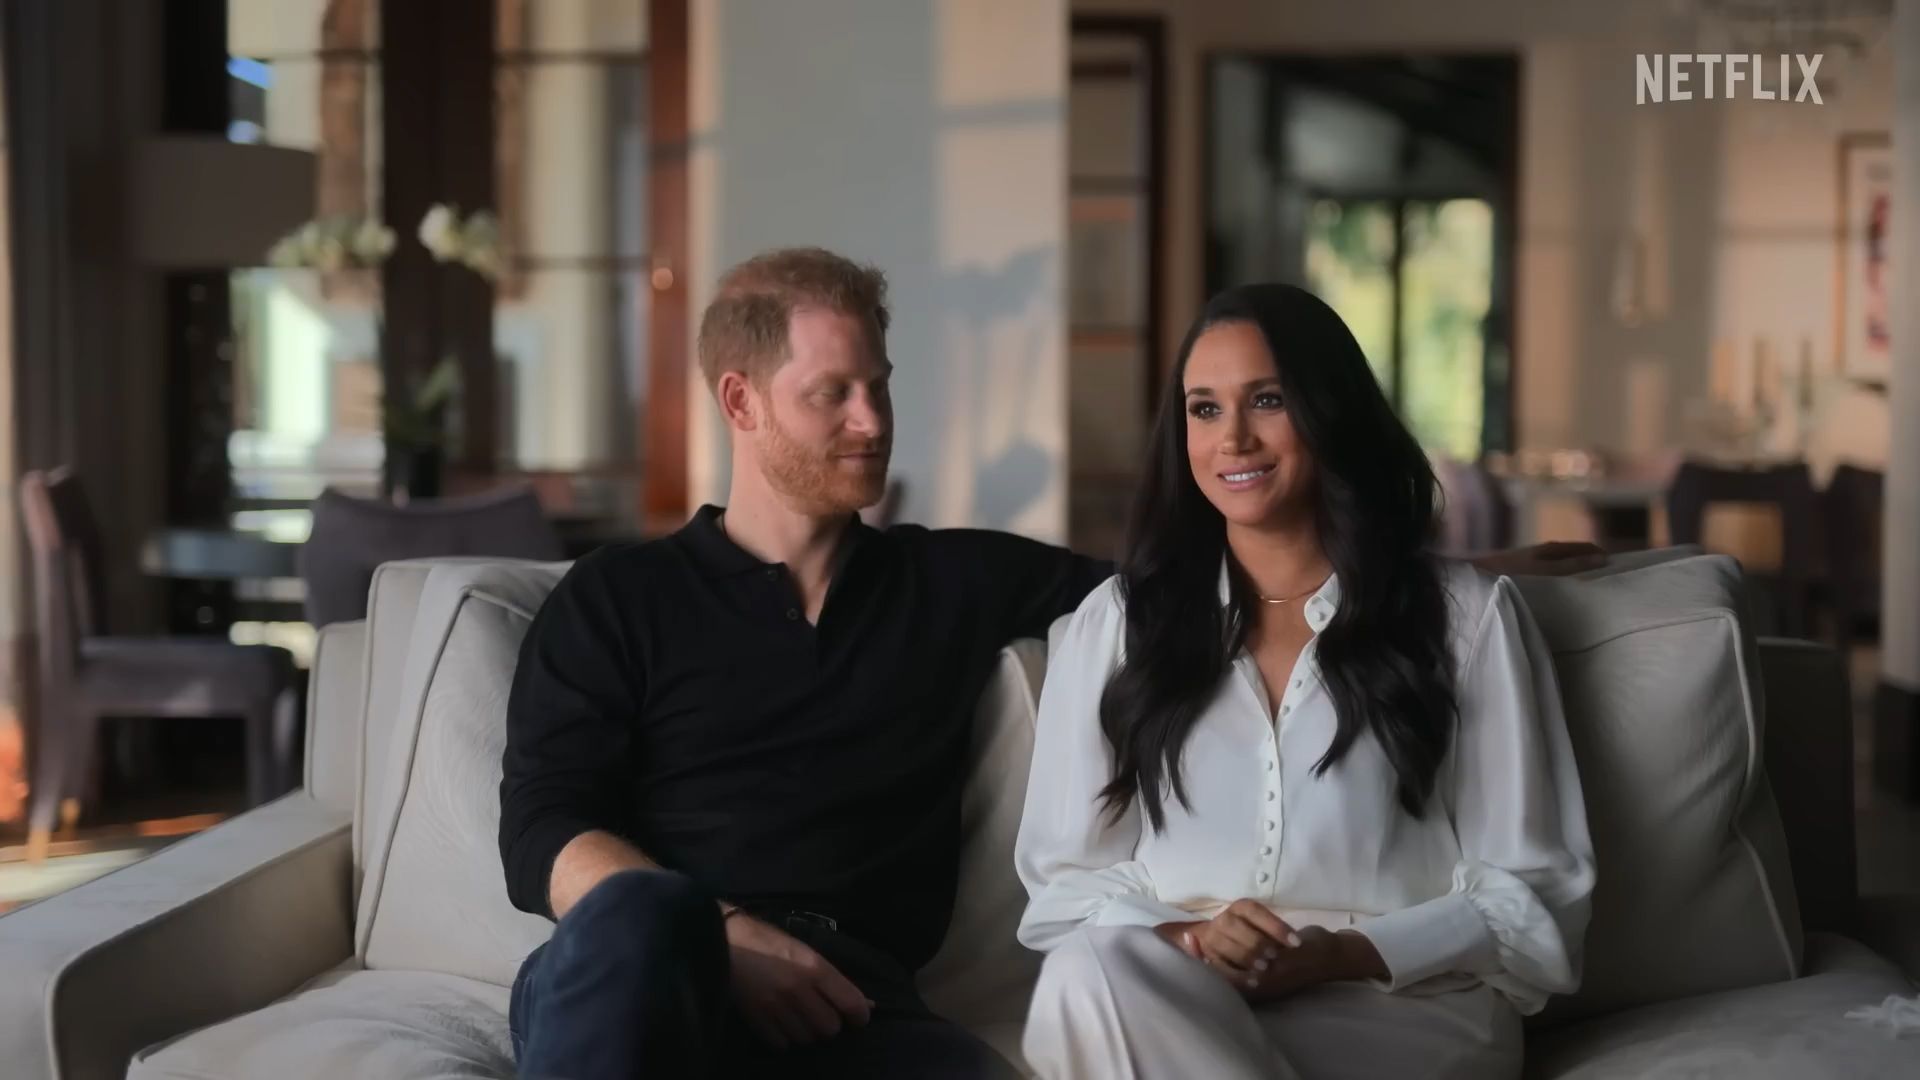 Prince Harry shares steamy details about having sex with Meghan Markle on Princess Diana’s death anniversary